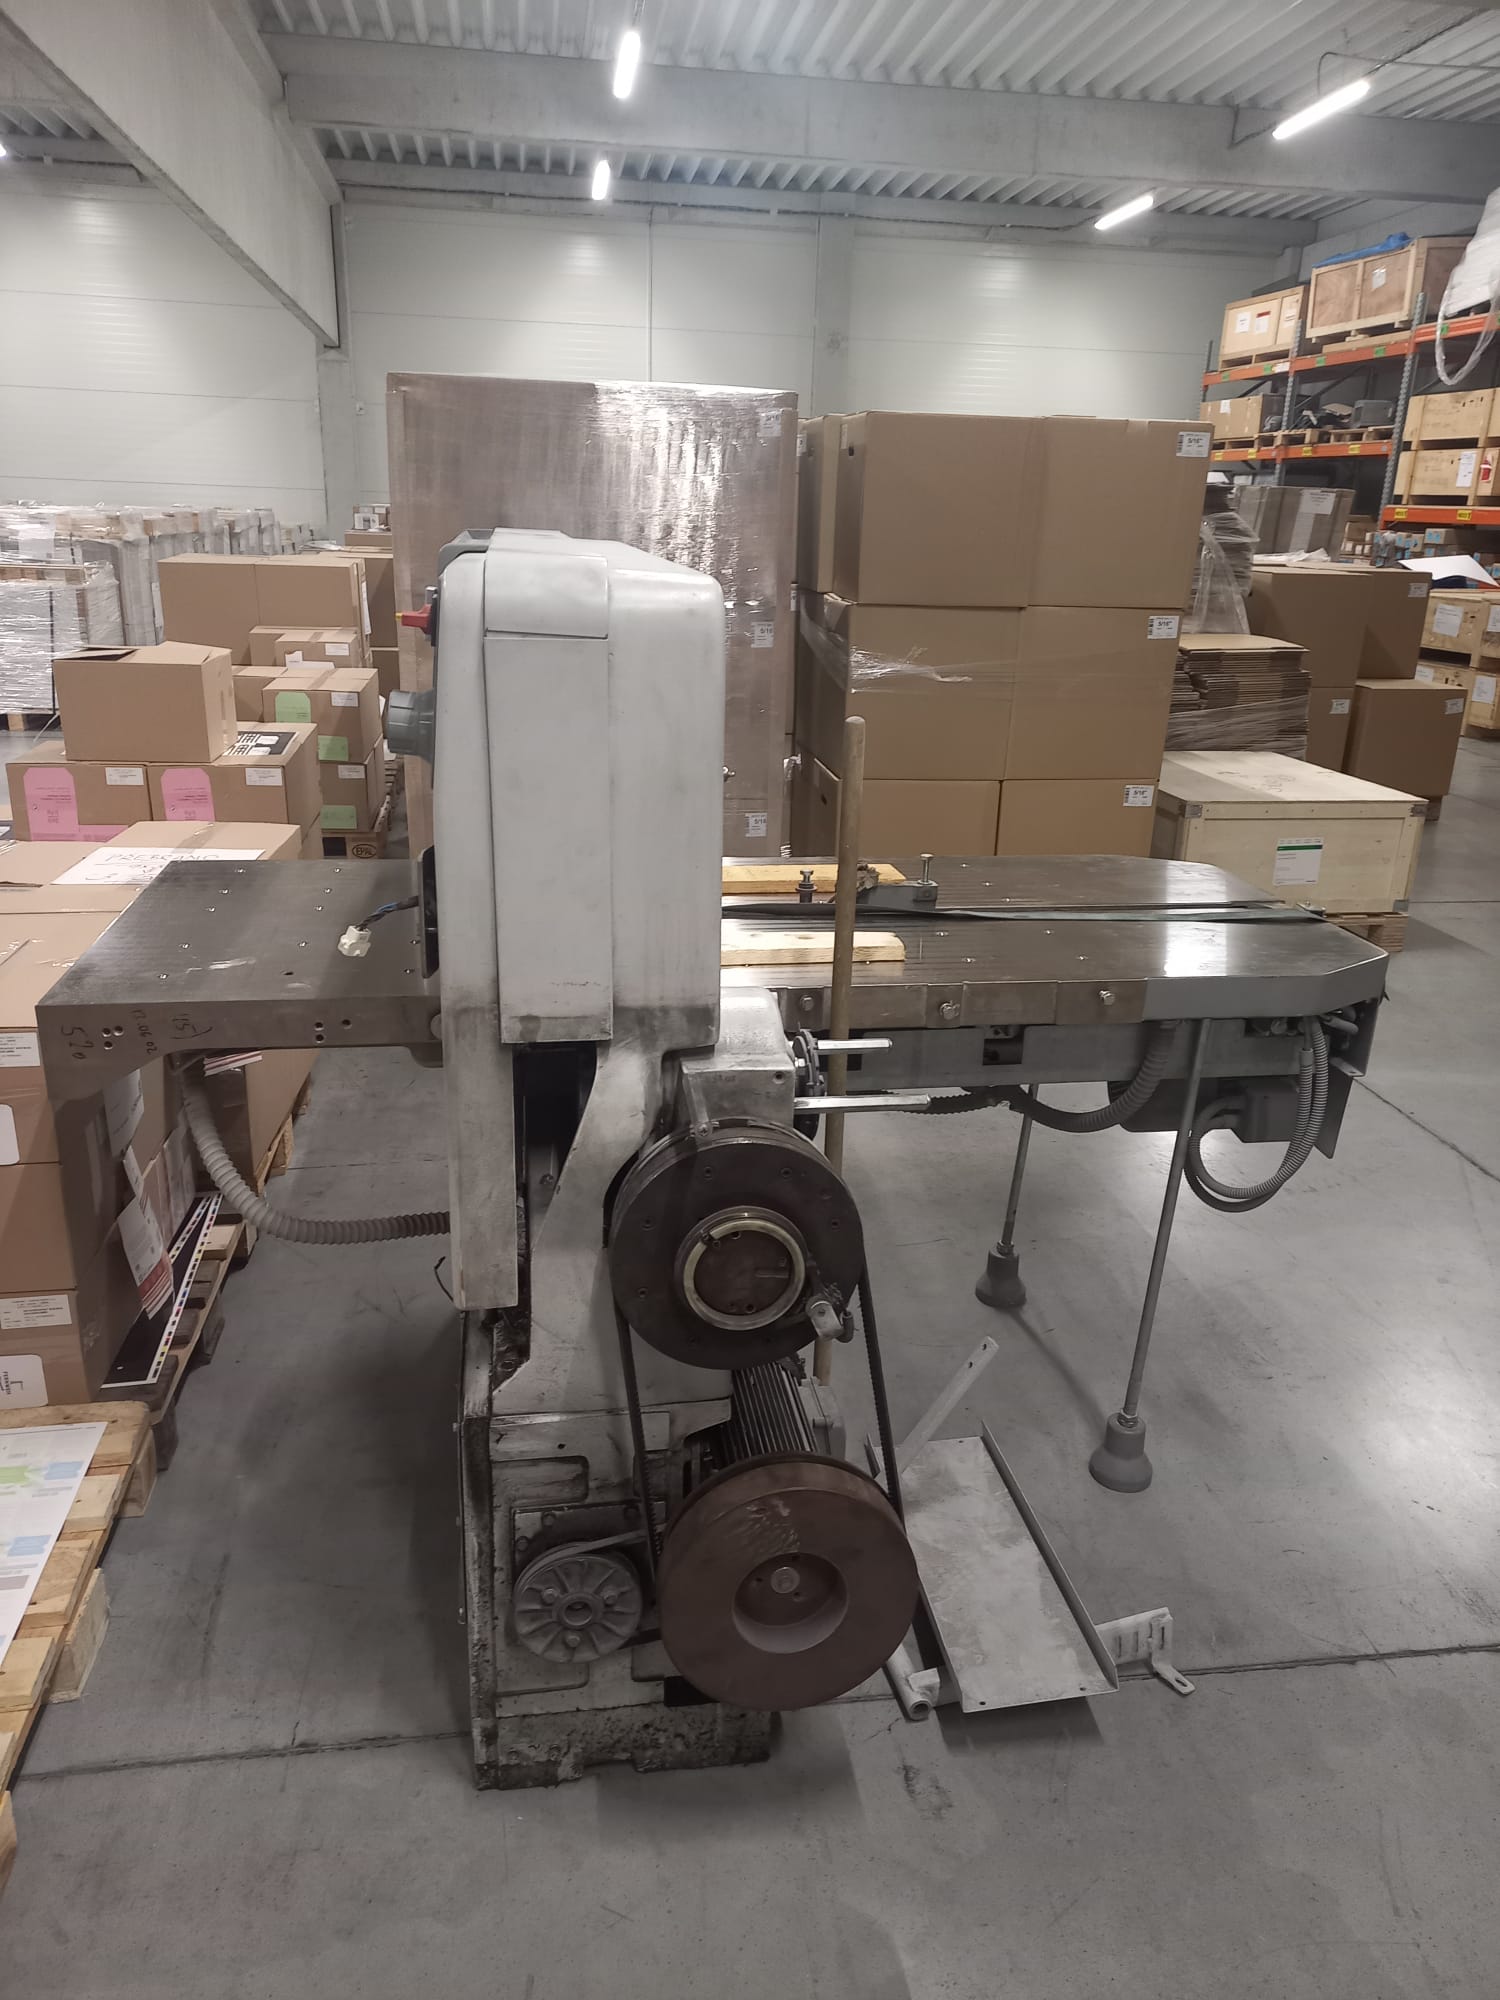 Polar 78-ES Guillotines Used Machinery for sale